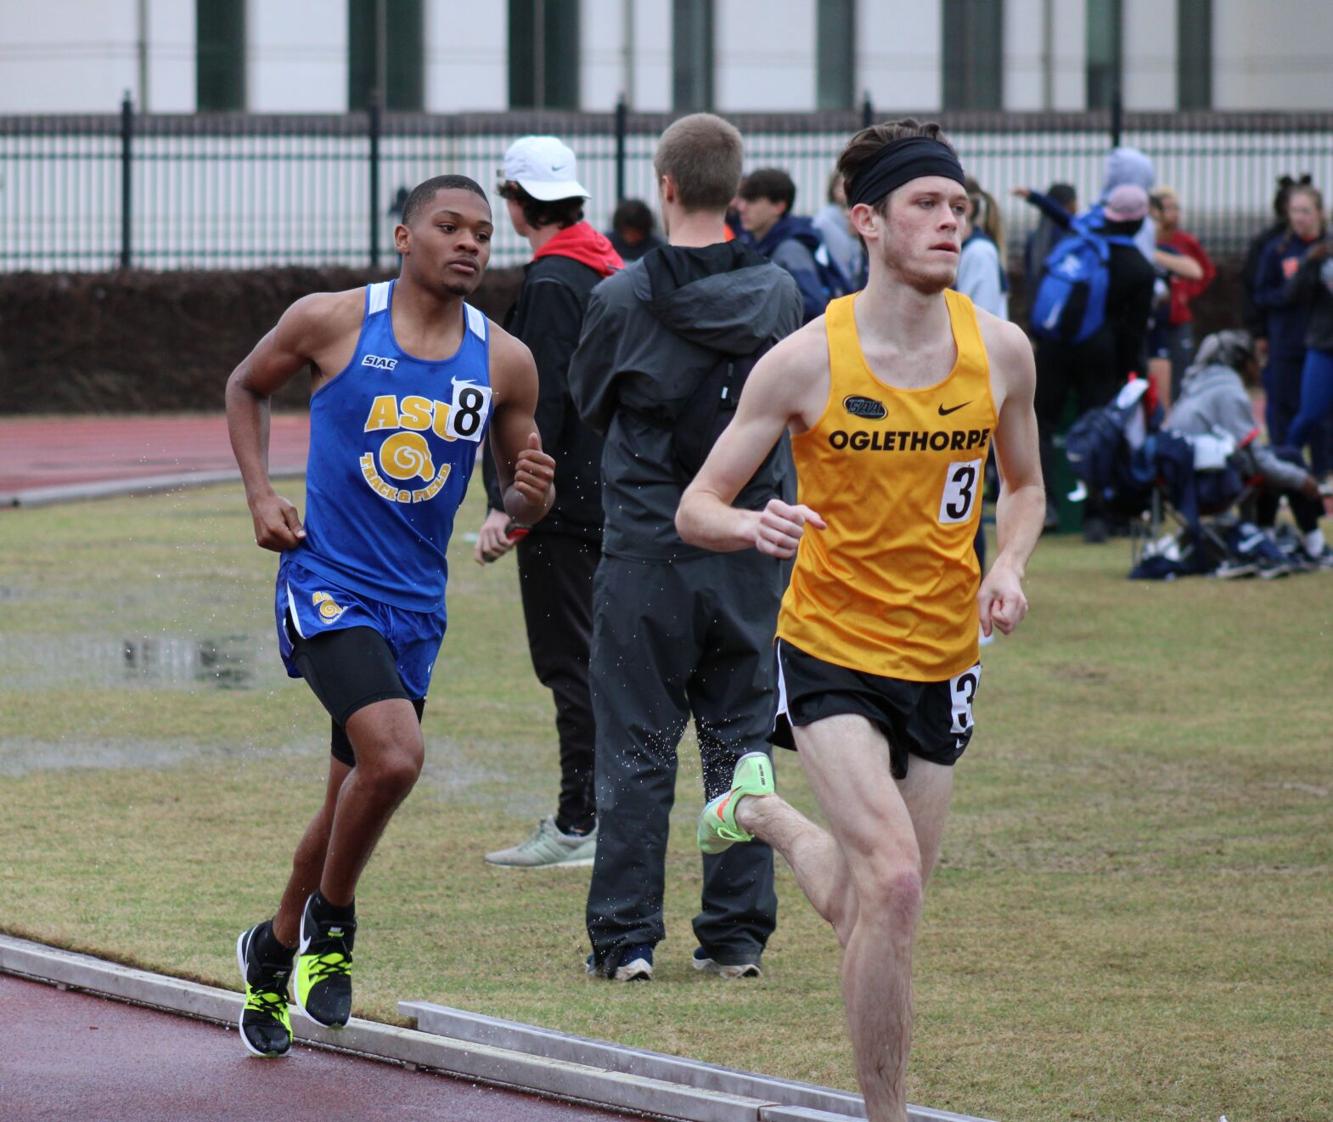 PHOTOS Albany State Track and Field team competes in the Emory Spring